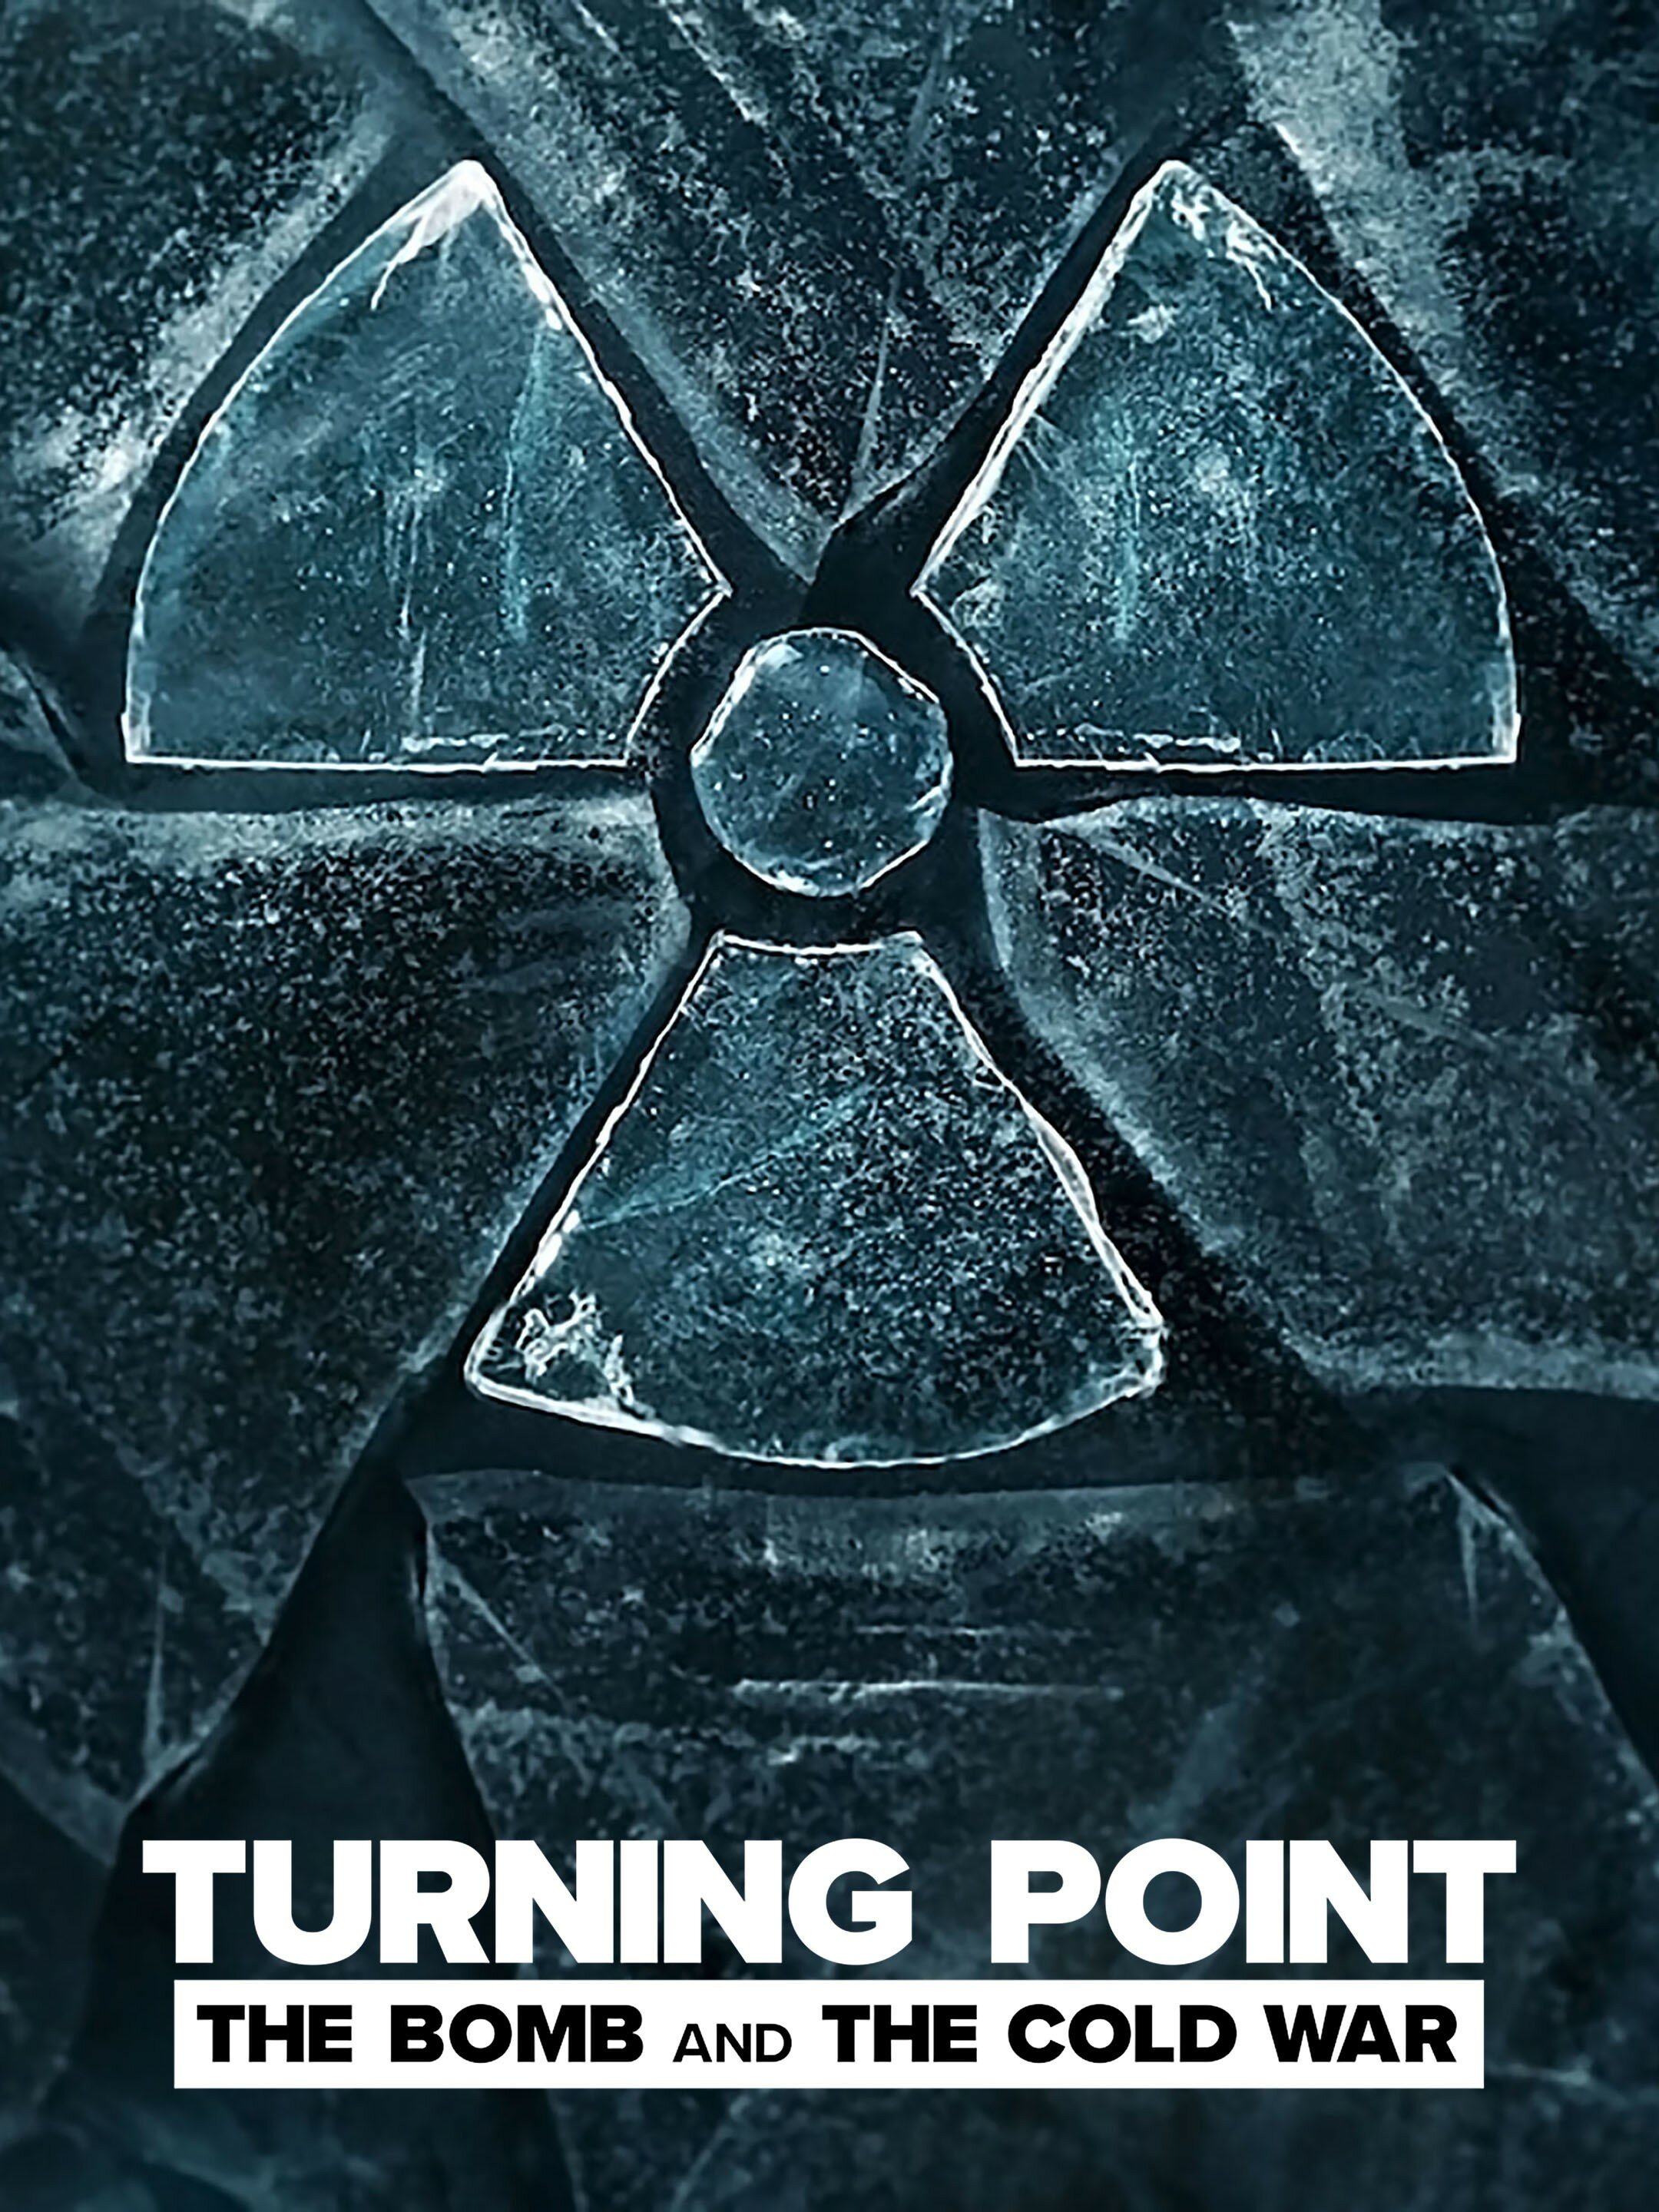 Turning Point: The Bomb and the Cold War ne zaman